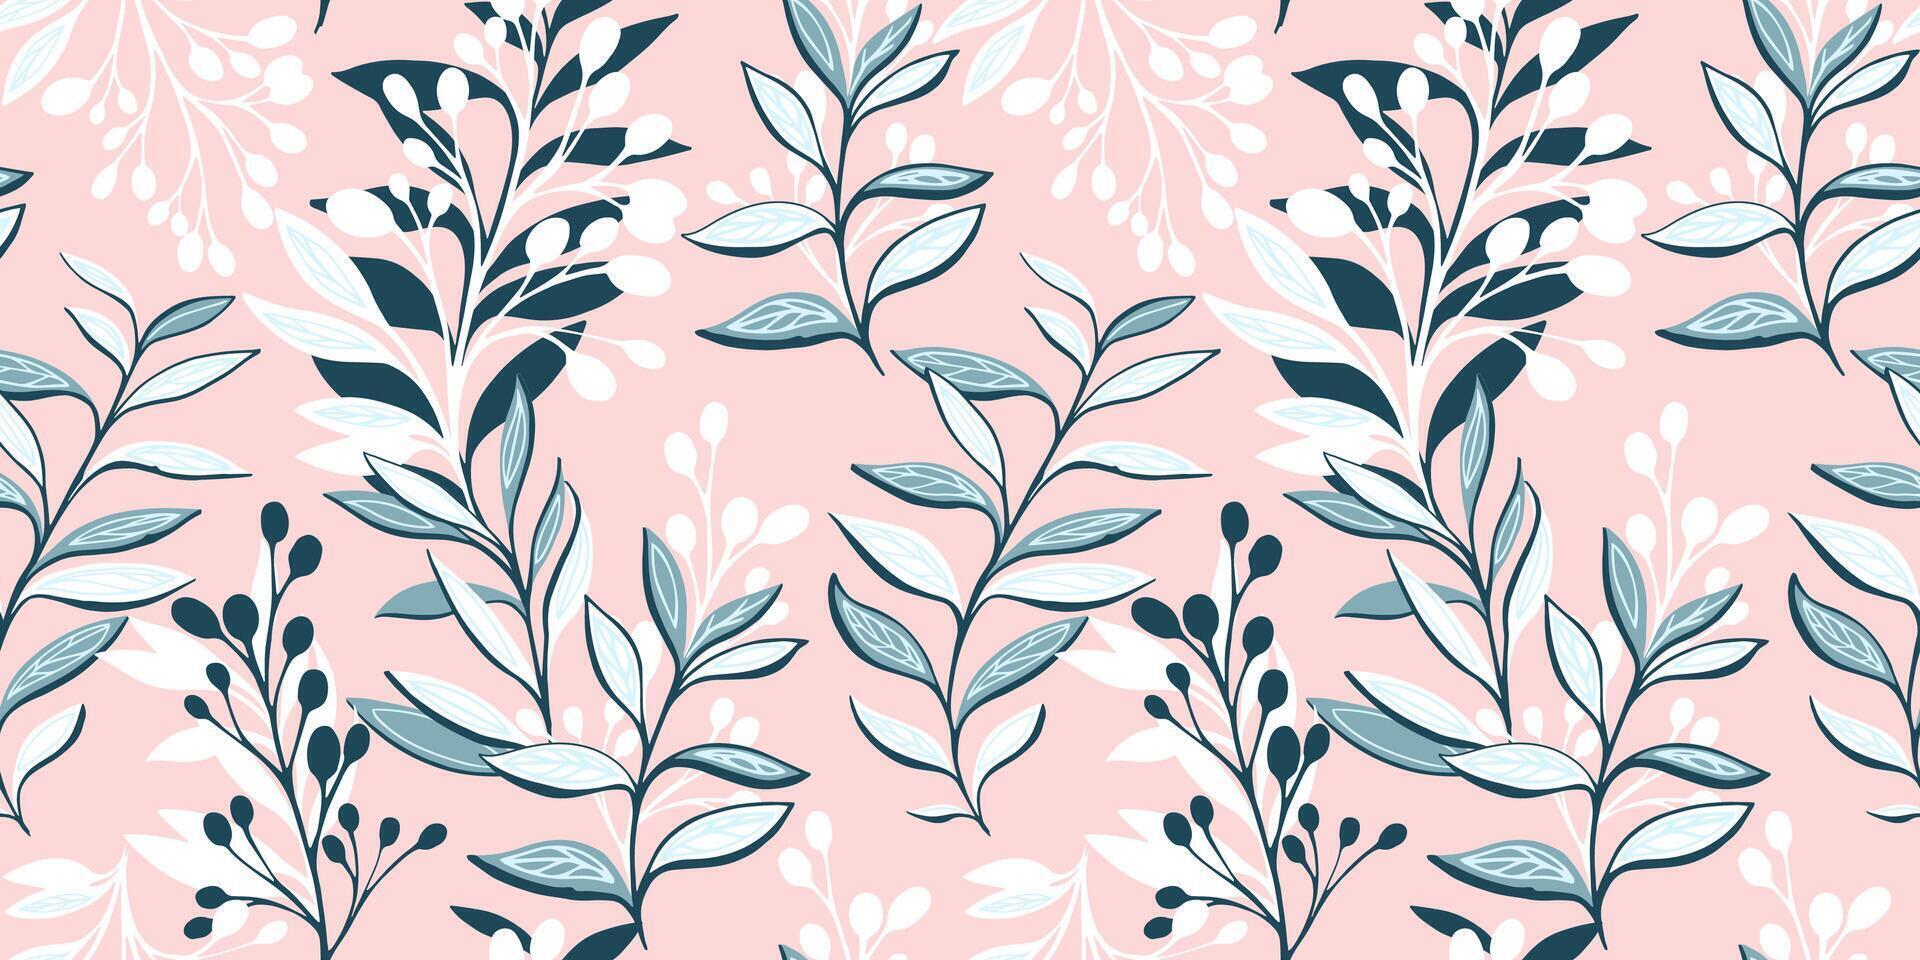 Seamless pattern with abstract, graphic stem leaves, branches berries. Vector hand drawn. Creative stylized floral on a pink background.  Template for design, fashion, fabric, printing